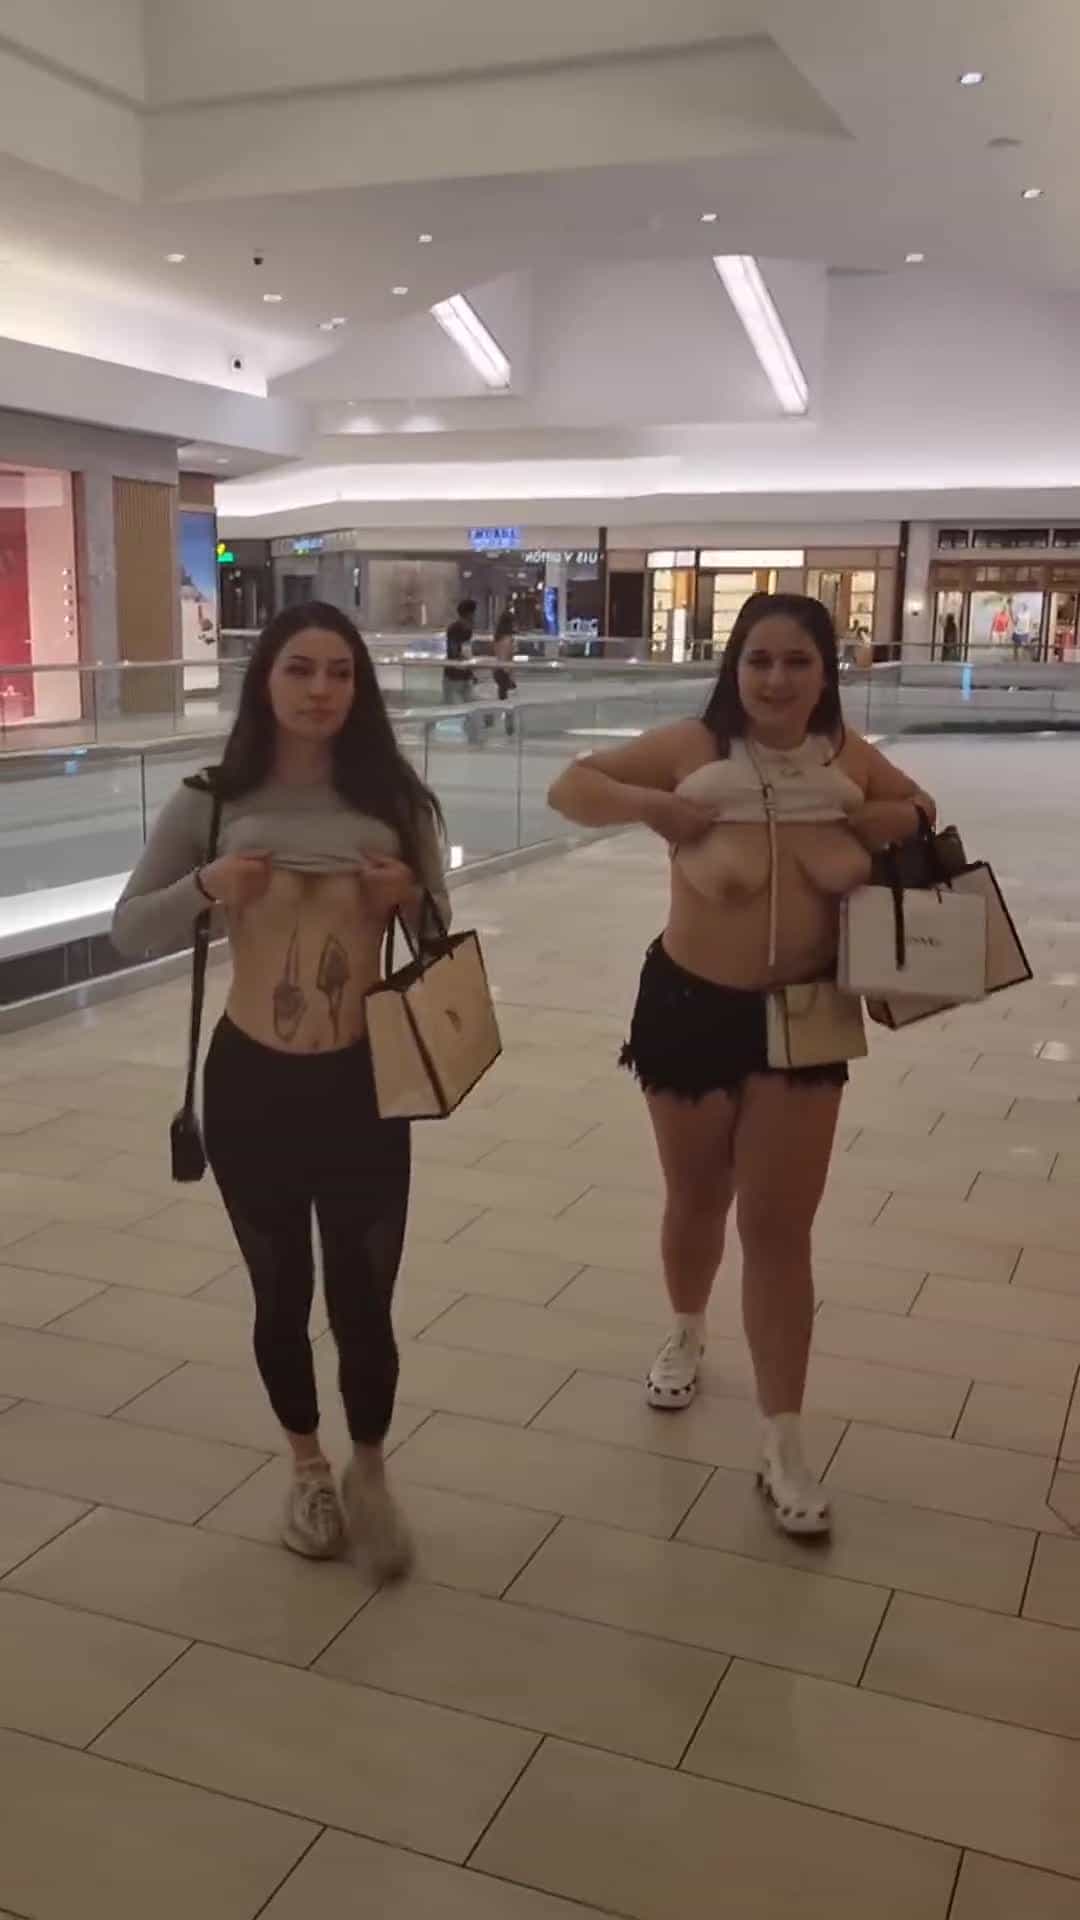 Will you fuck us in the mall?